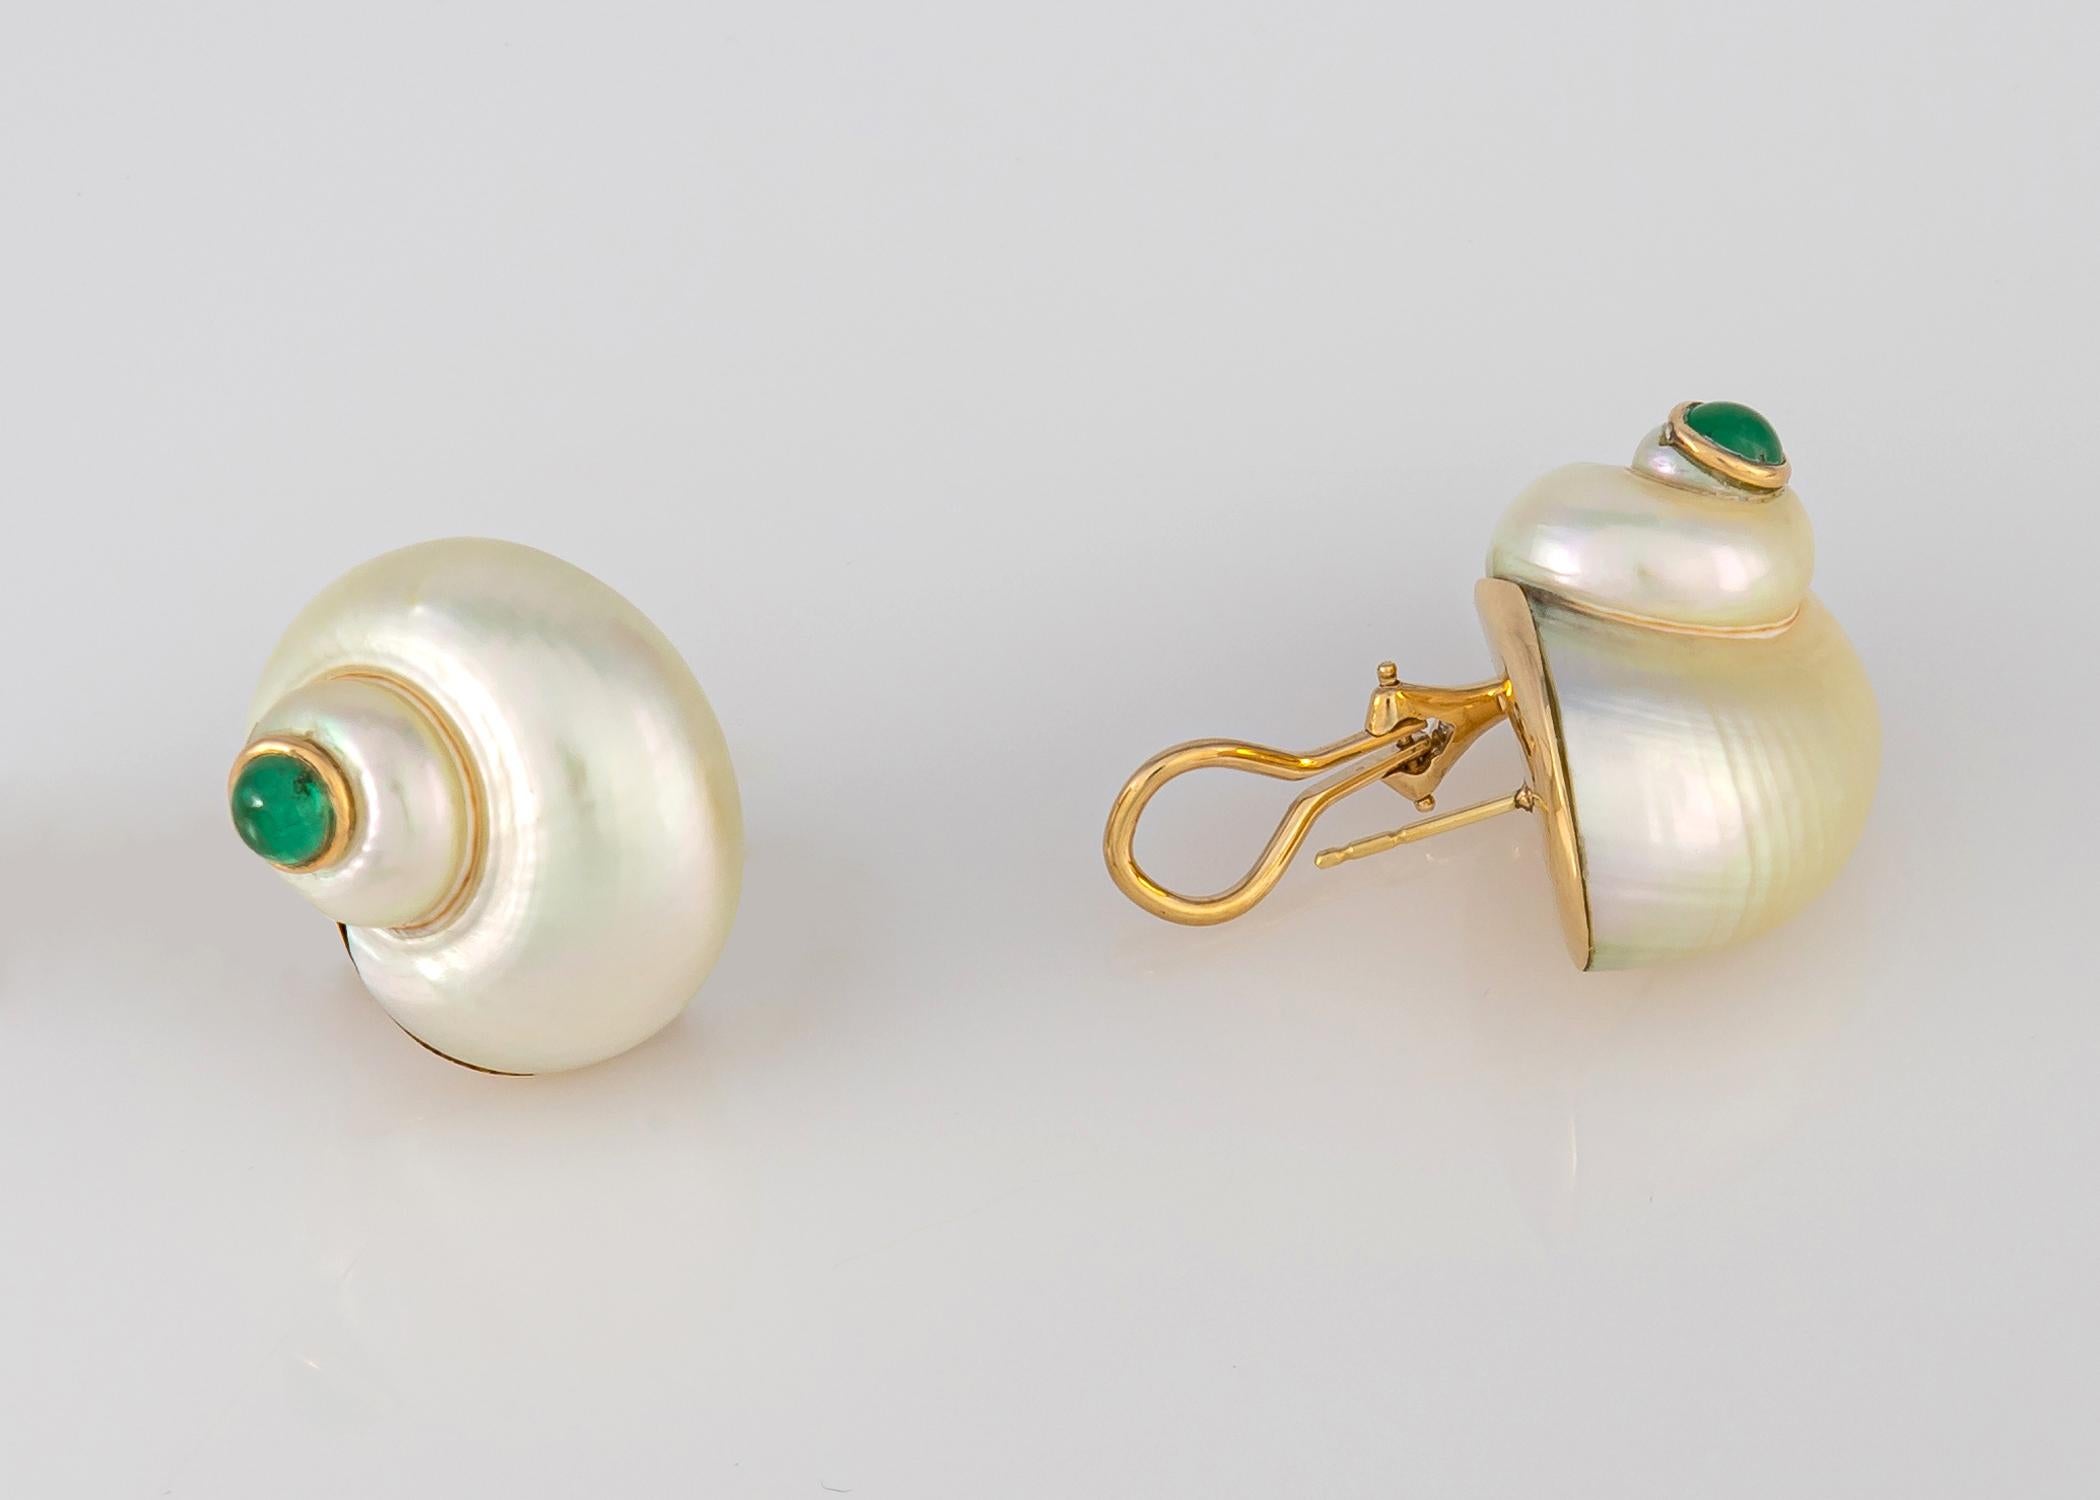 Simply classic. Glowing white natural shells are finished with cabochon emeralds and yellow gold bezels. Easy to wear and a wonderful flattering shape. 1 inch in size.